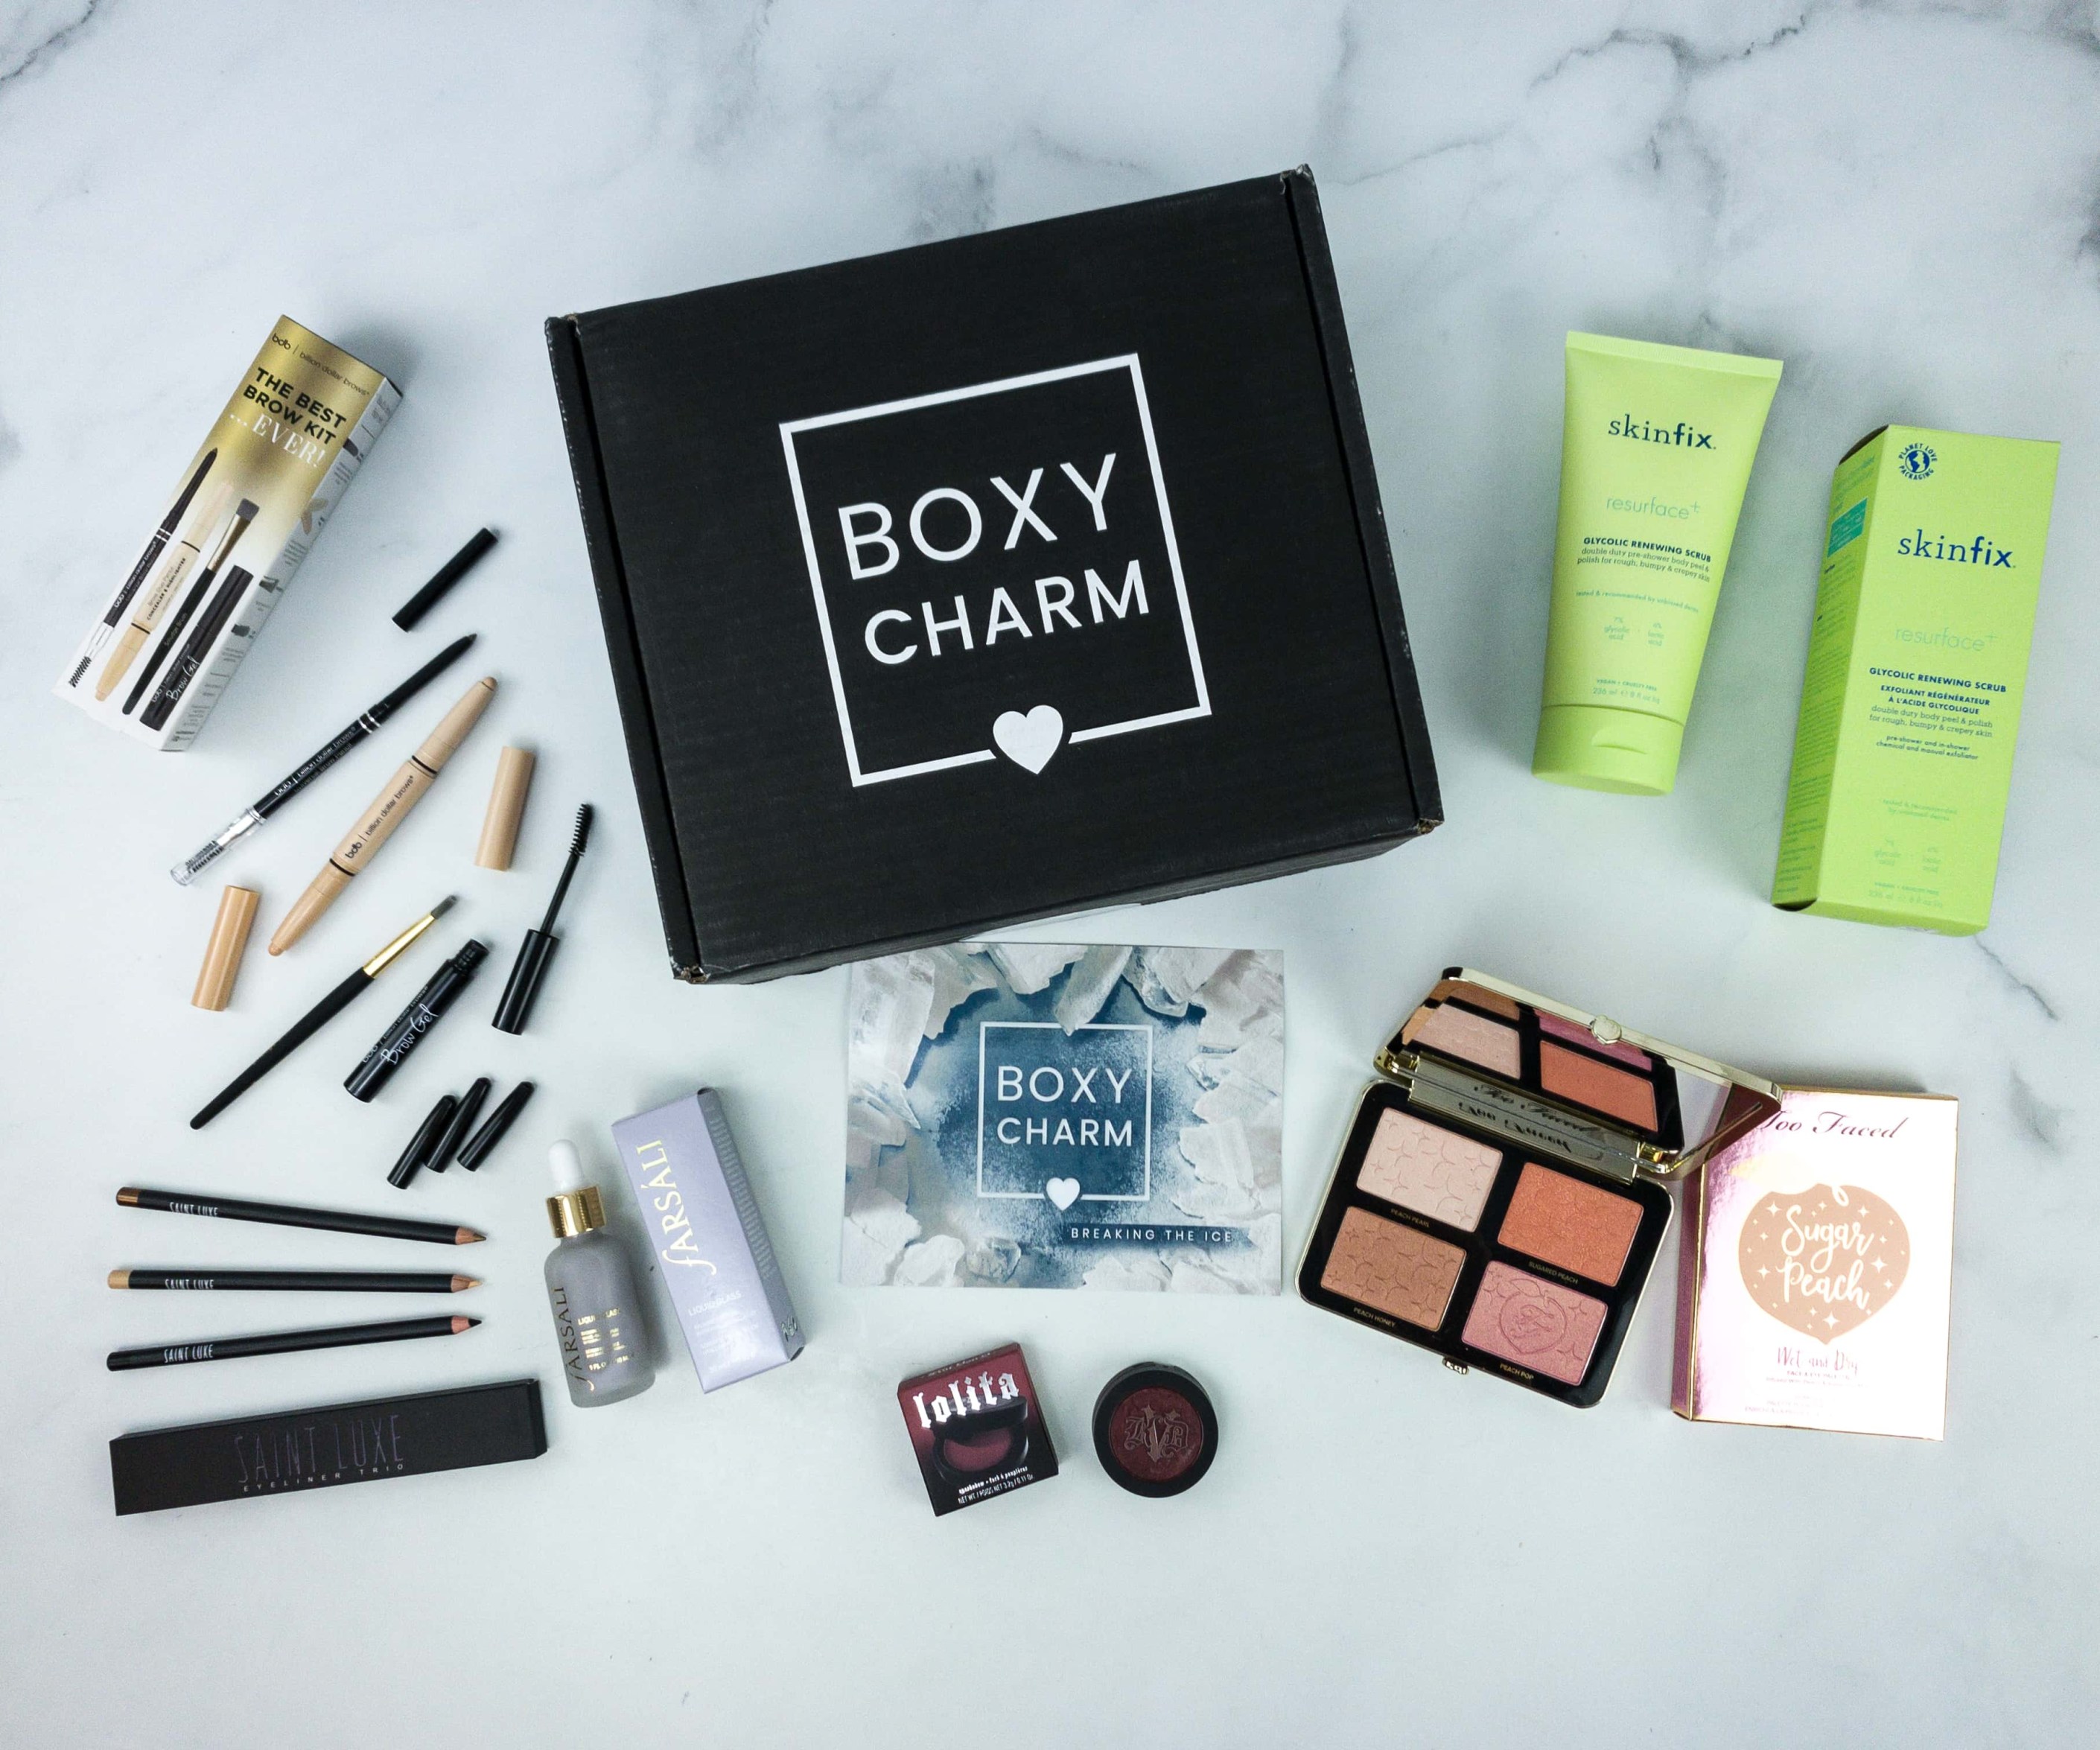 BOXYCHARM Premium Reviews Get All The Details At Hello Subscription!